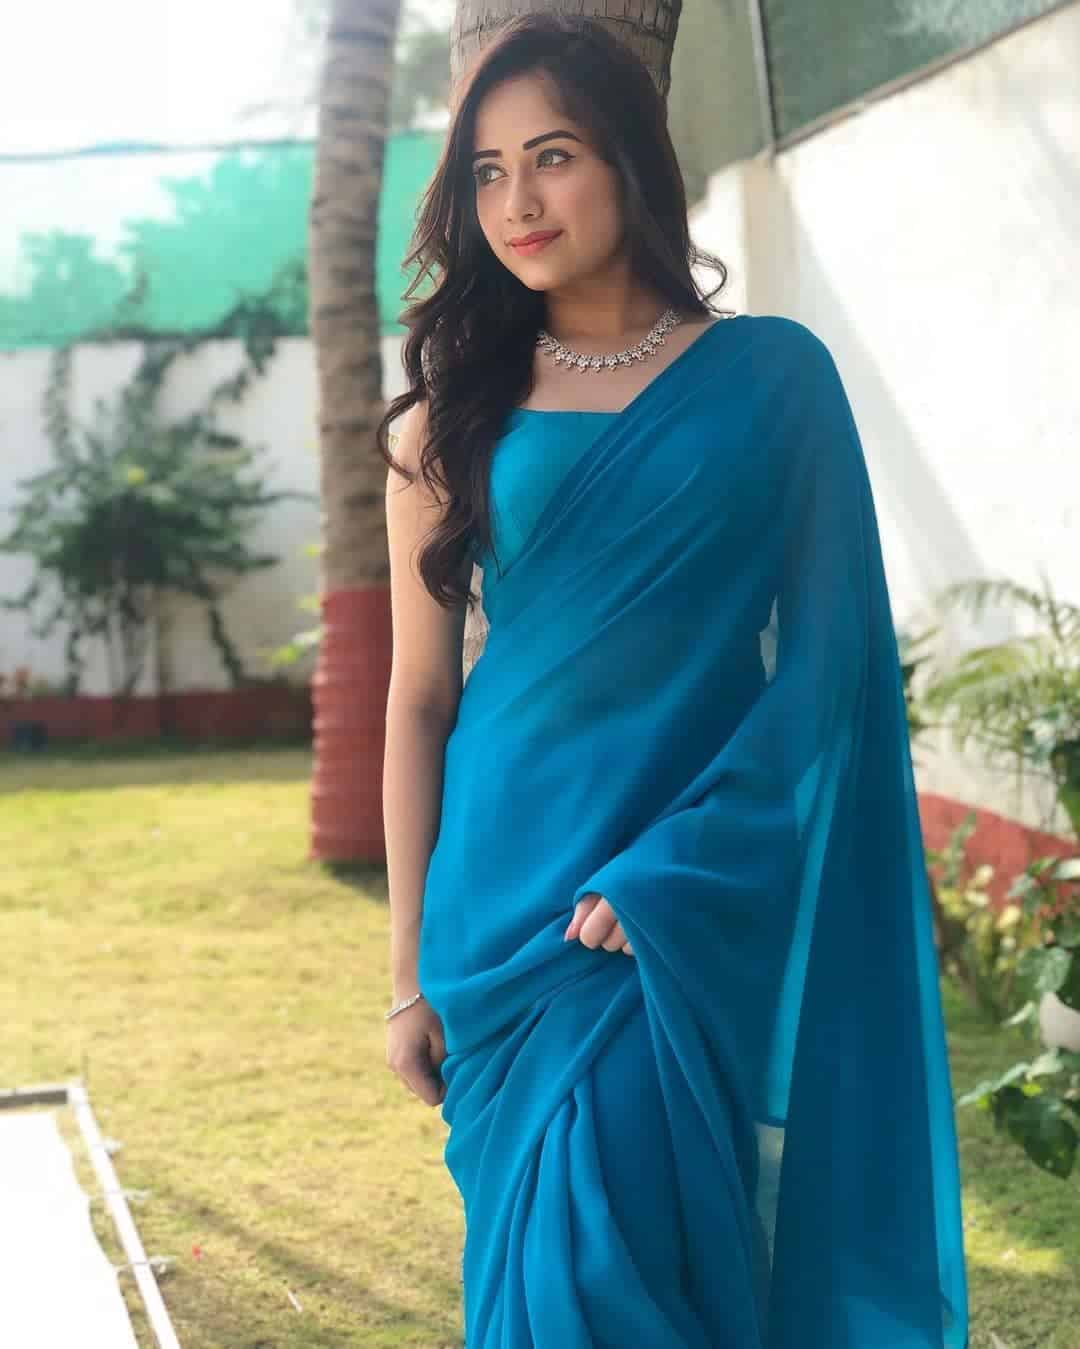 Photo Poses for Girl in Saree